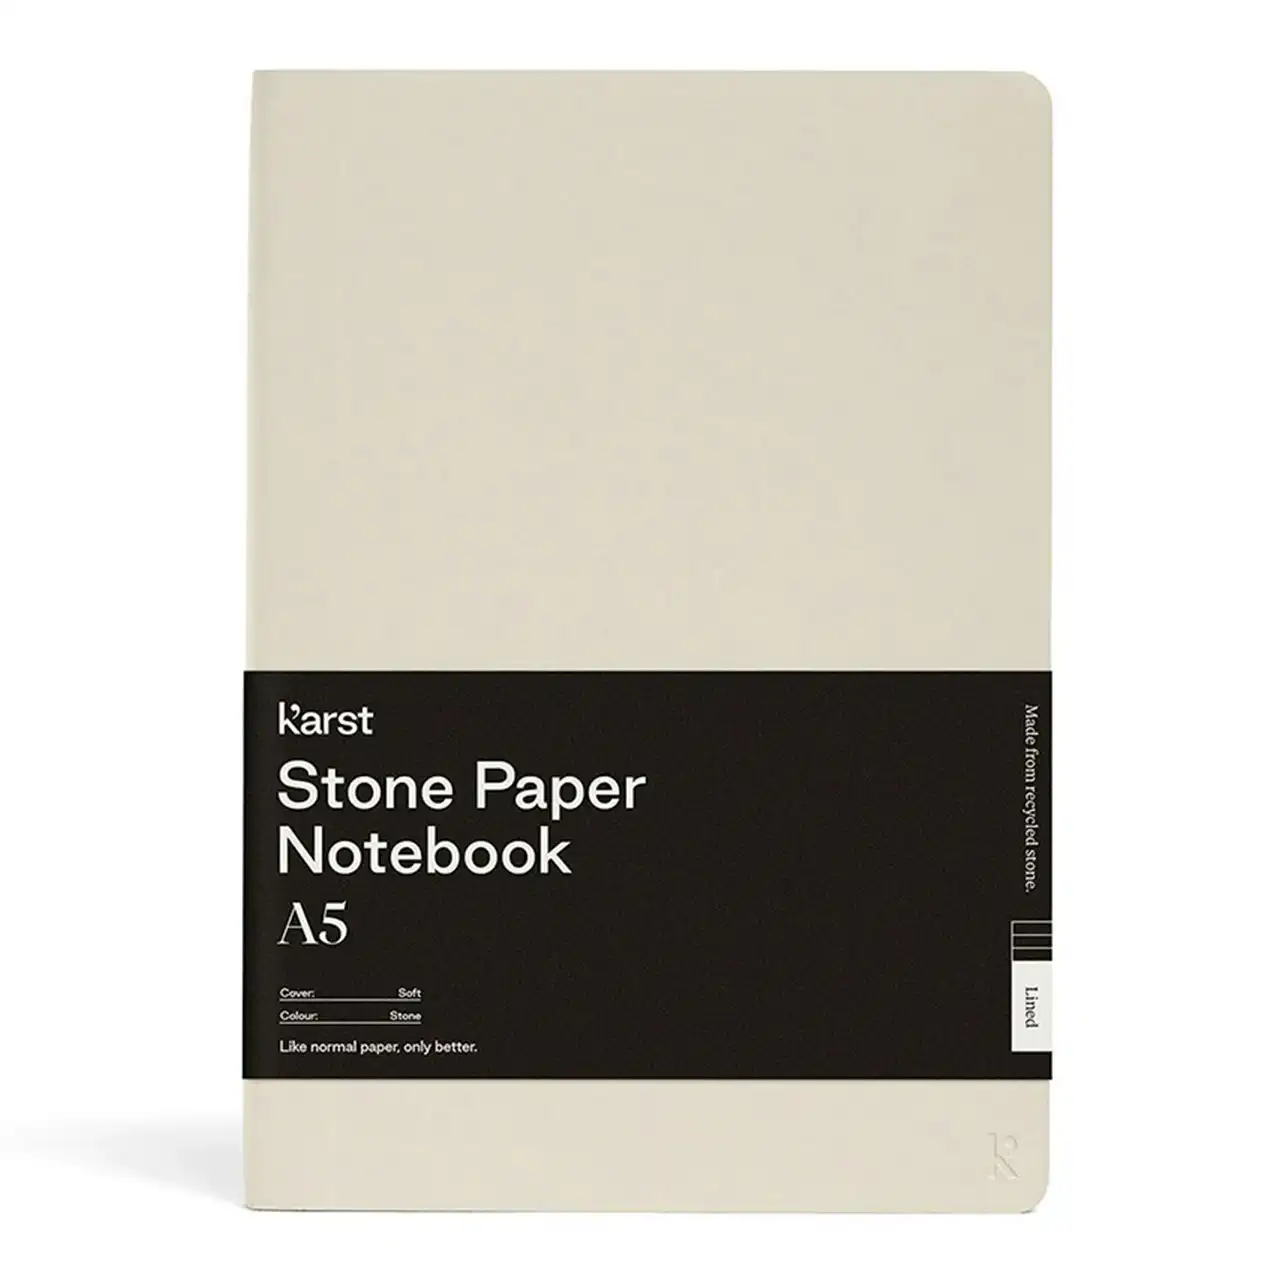 Karst Soft Cover A5 Notebook Plain 100gsm Paper Writing Journal 144 Pages Stone